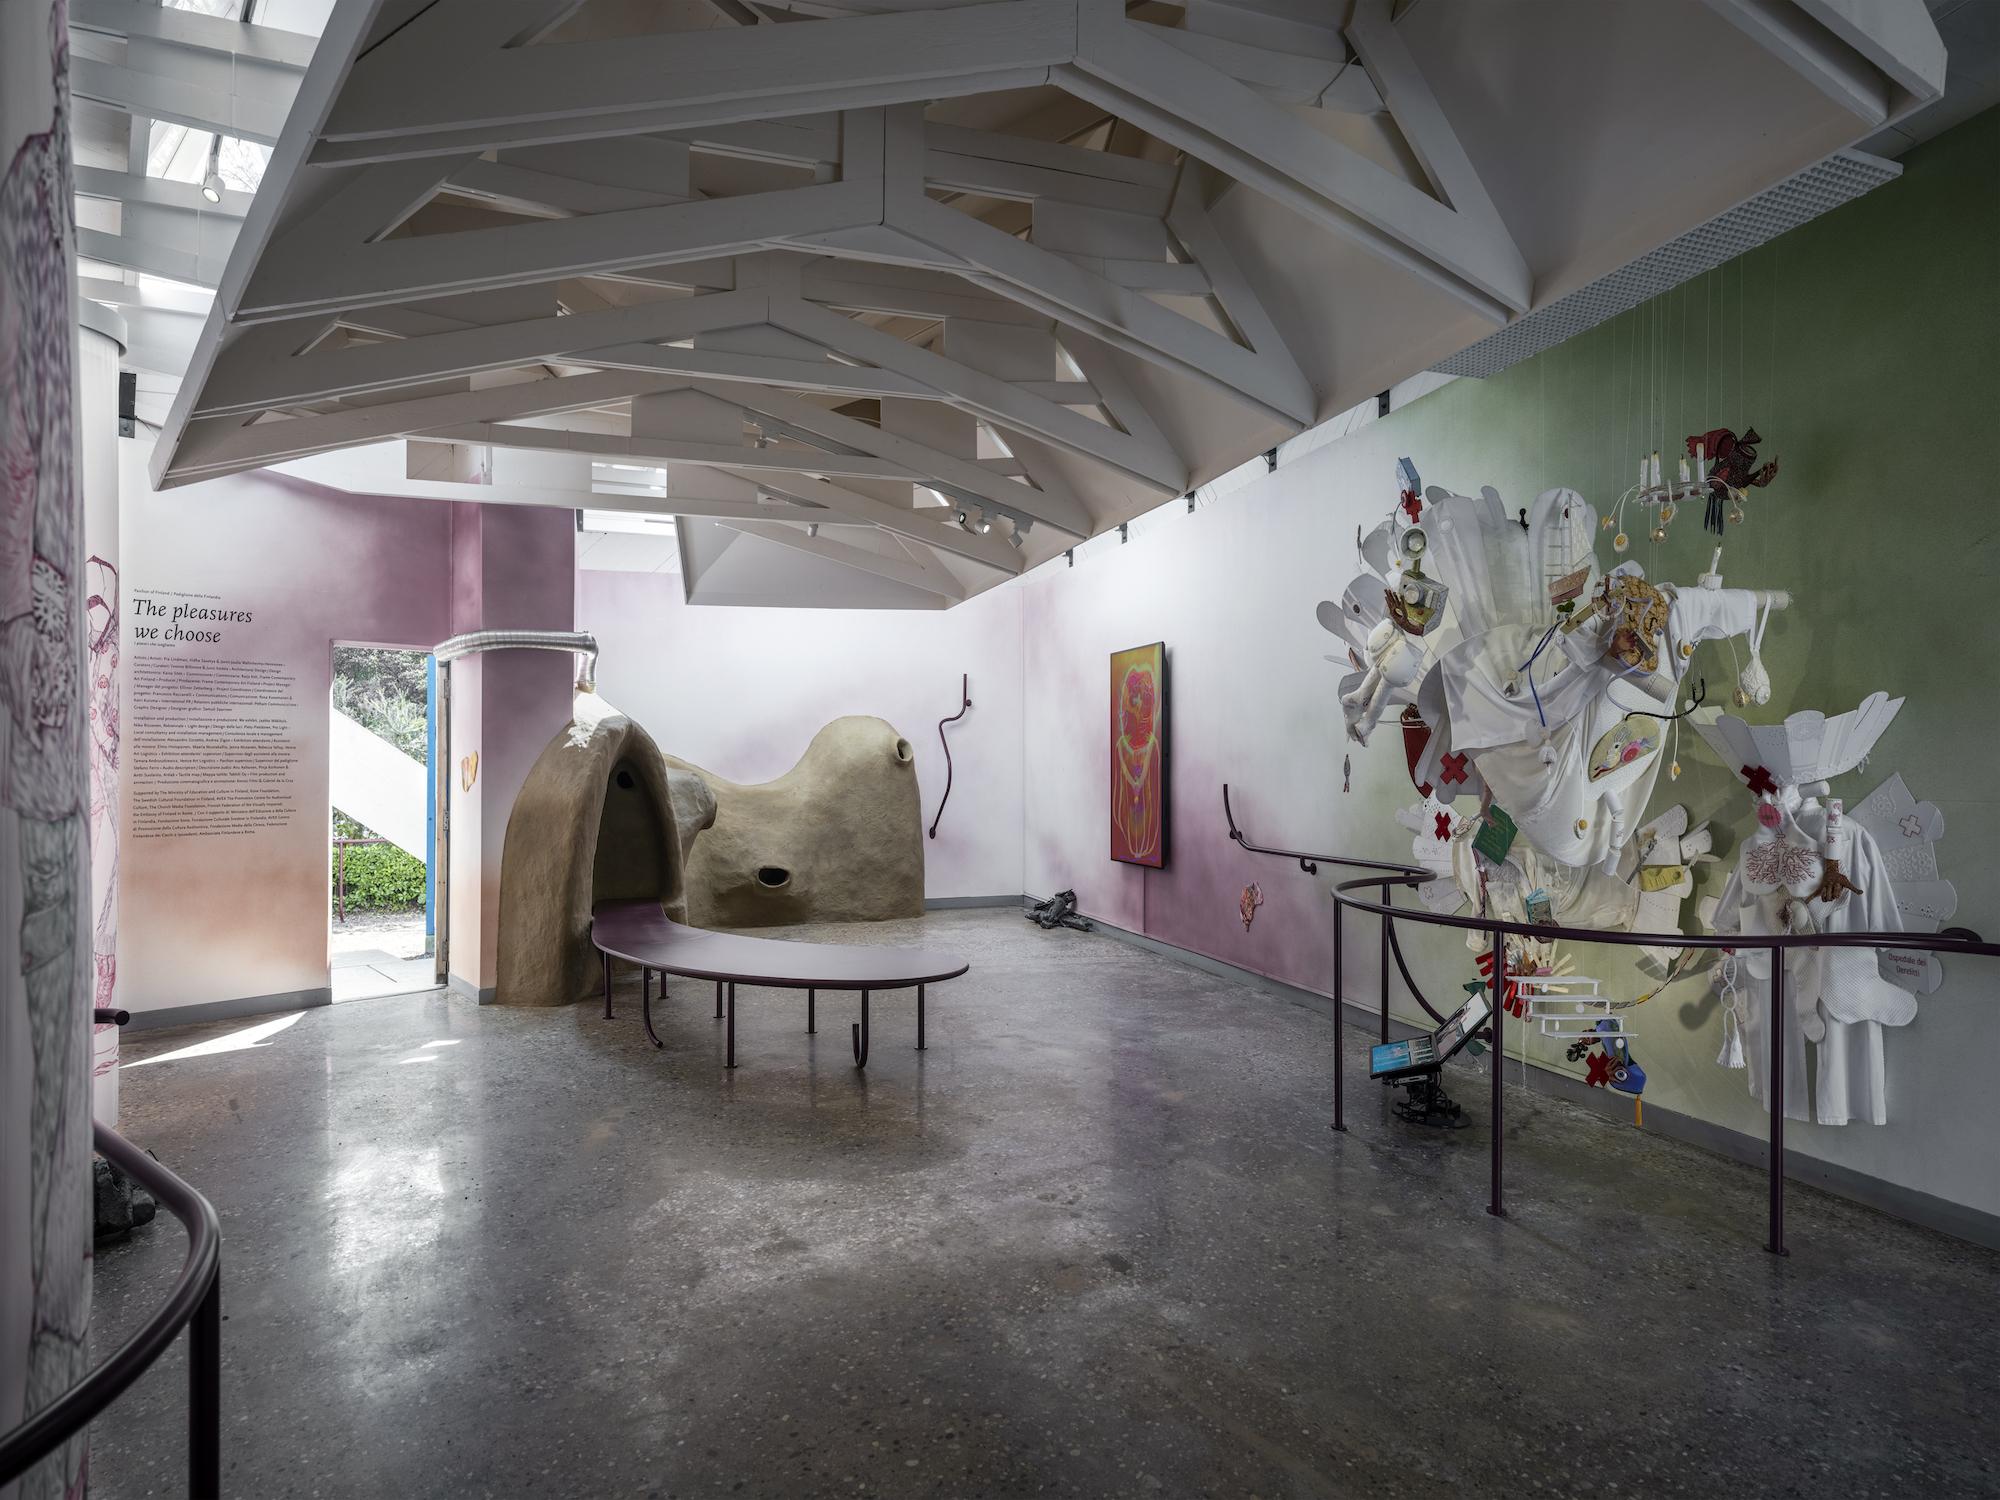 A pavilion space with colorful walls of green and red hues. On the right a sculptural textile artwork with white fabrics and colorful details. On the back a brown clay sculpture and a video screen with an abstract orange shape. A dark handrail goes through the space.